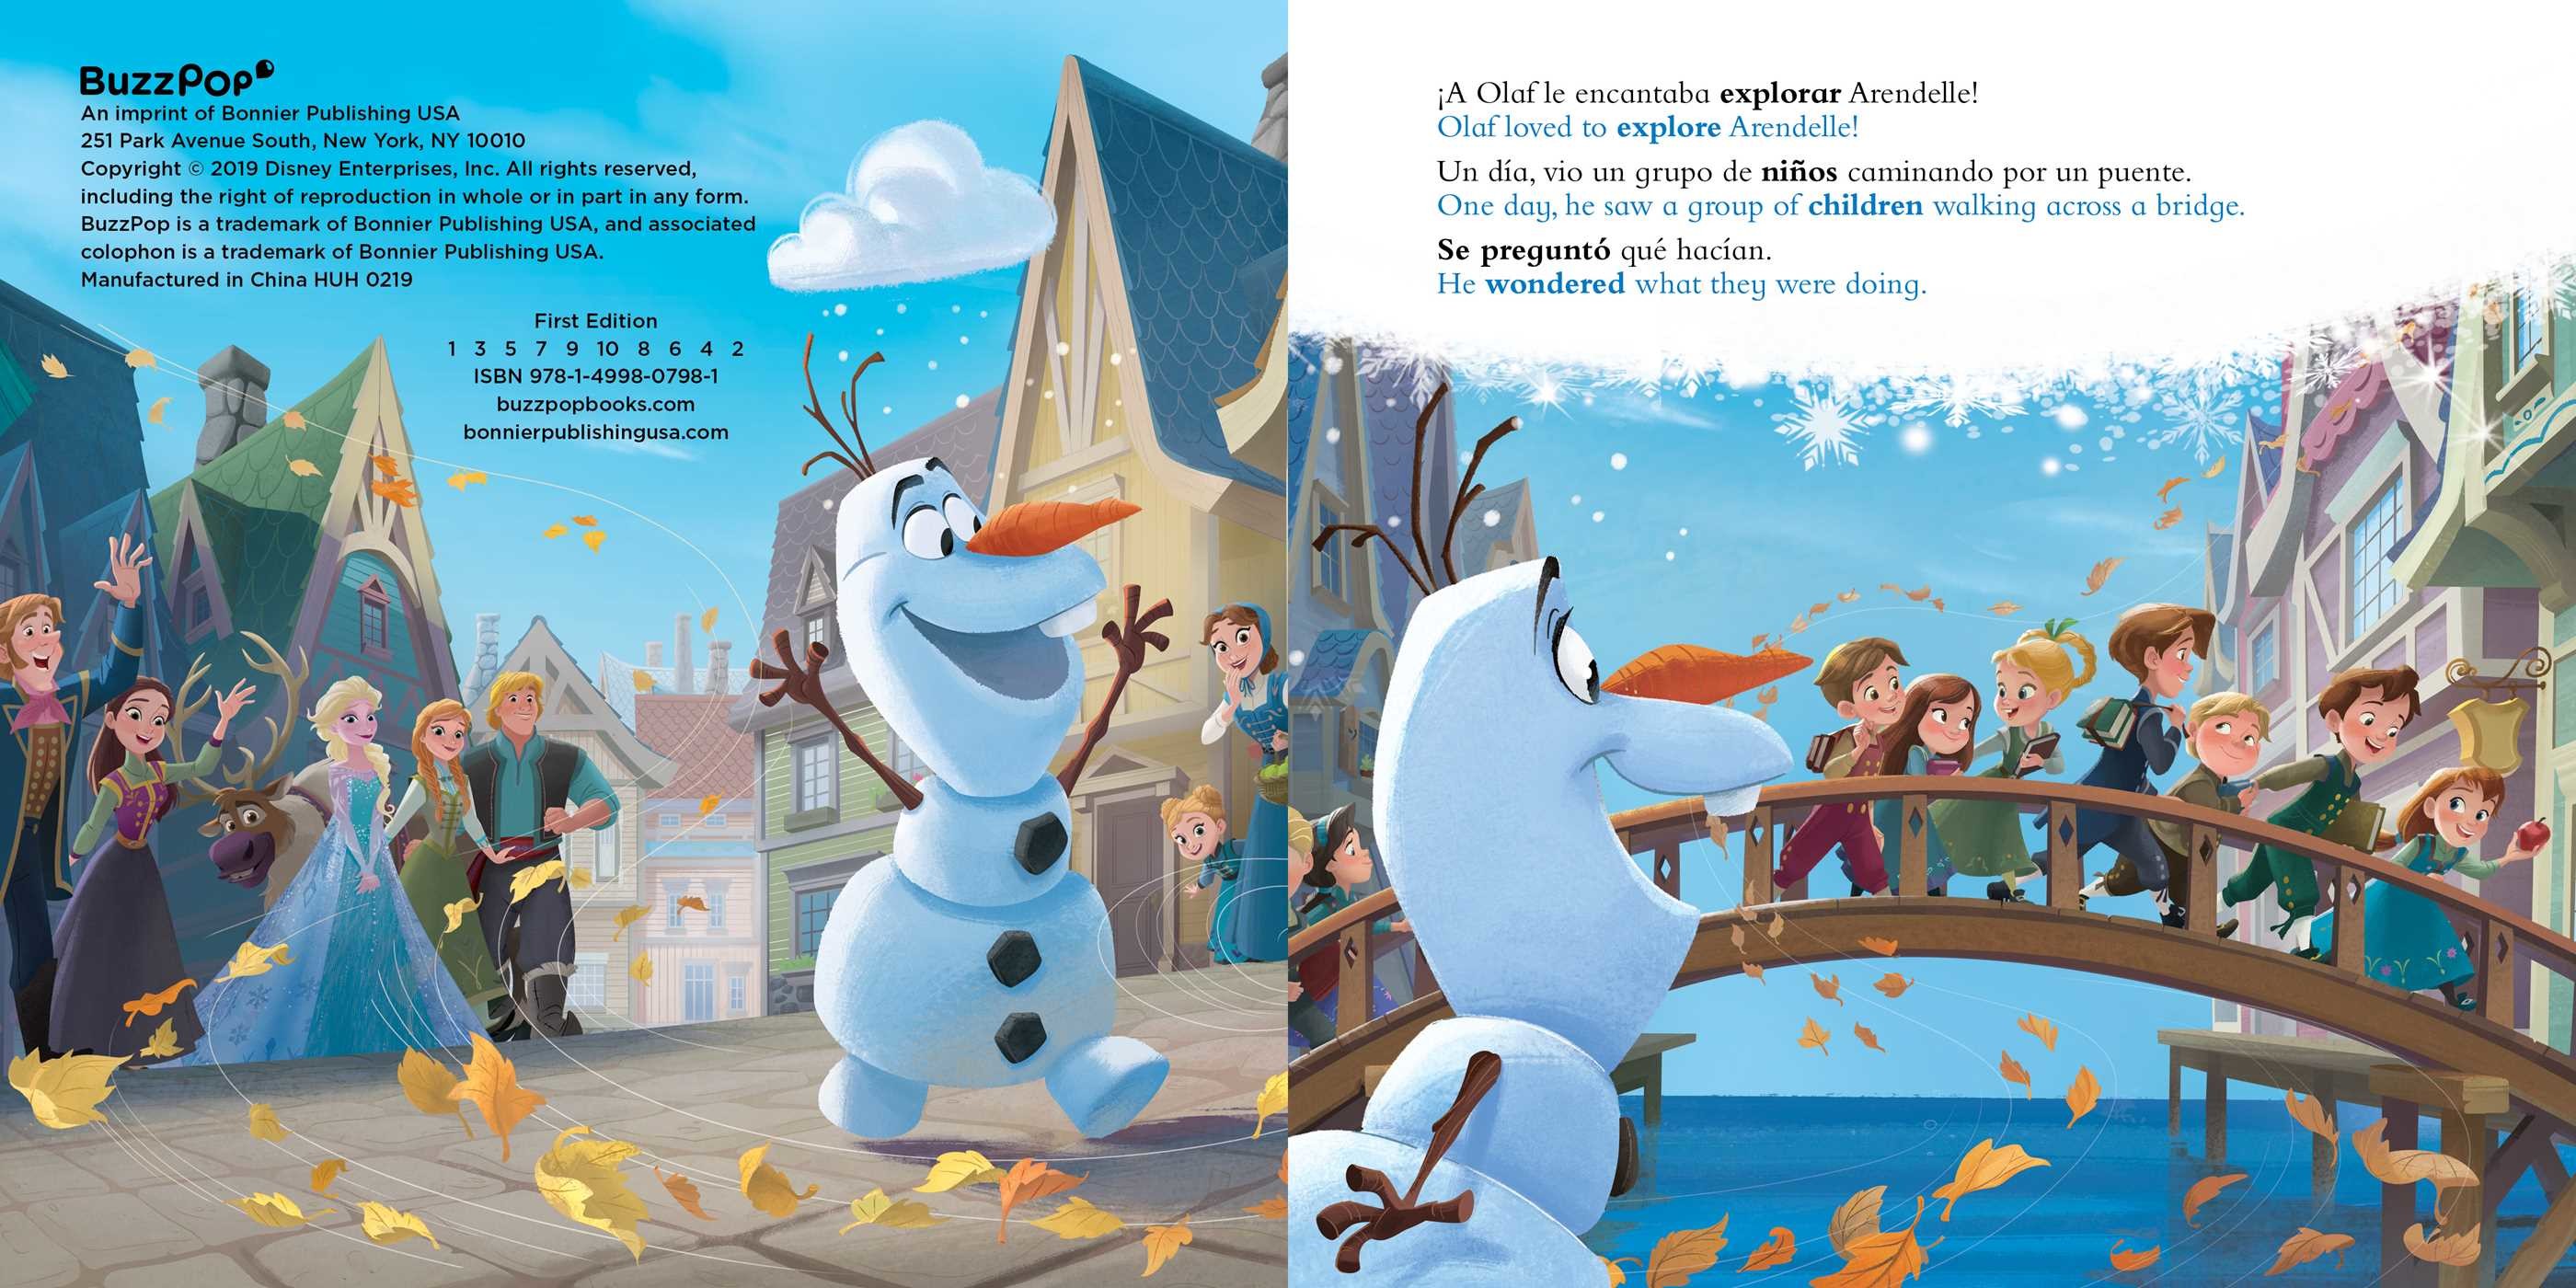 show-and-tell-mostrar-y-contar-english-spanish-disney-olaf-s-frozen-adventure-9781499807981.in01